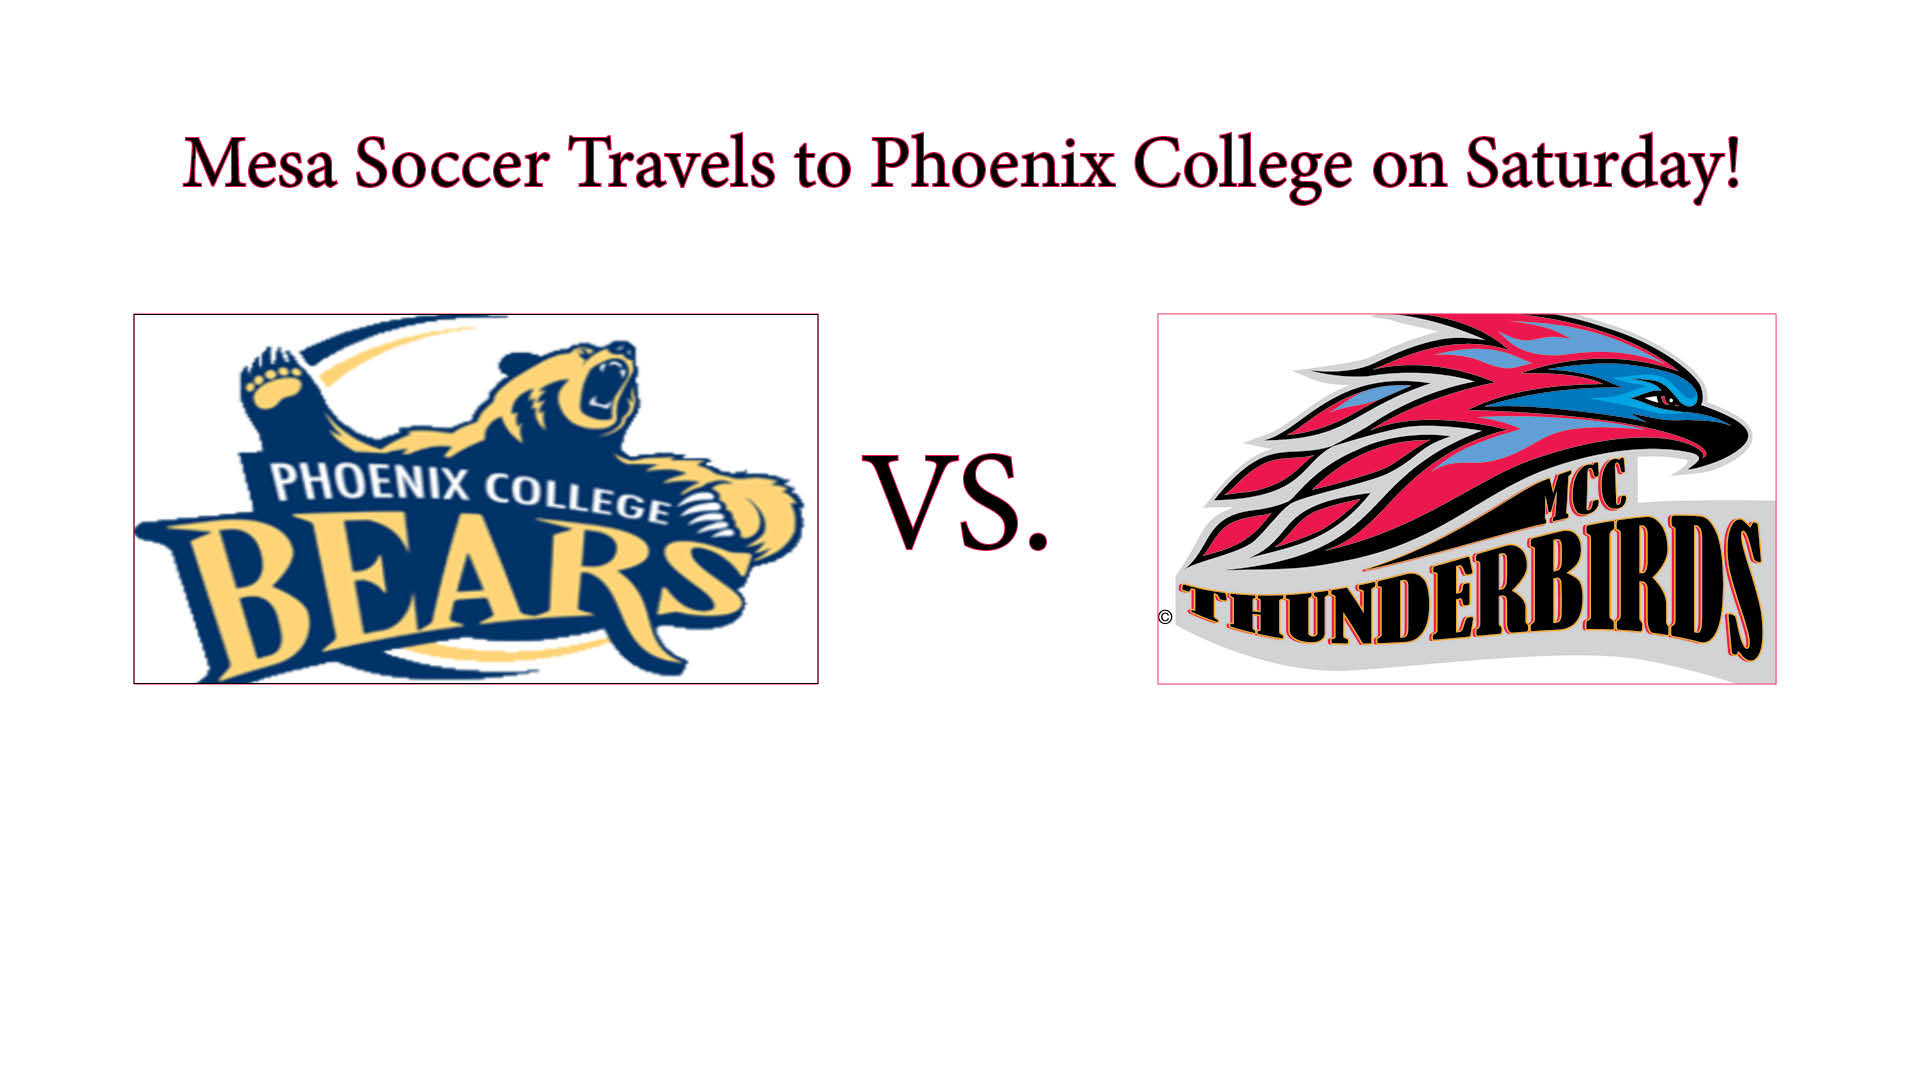 Mesa Soccer travels to take on best in the nation on Saturday